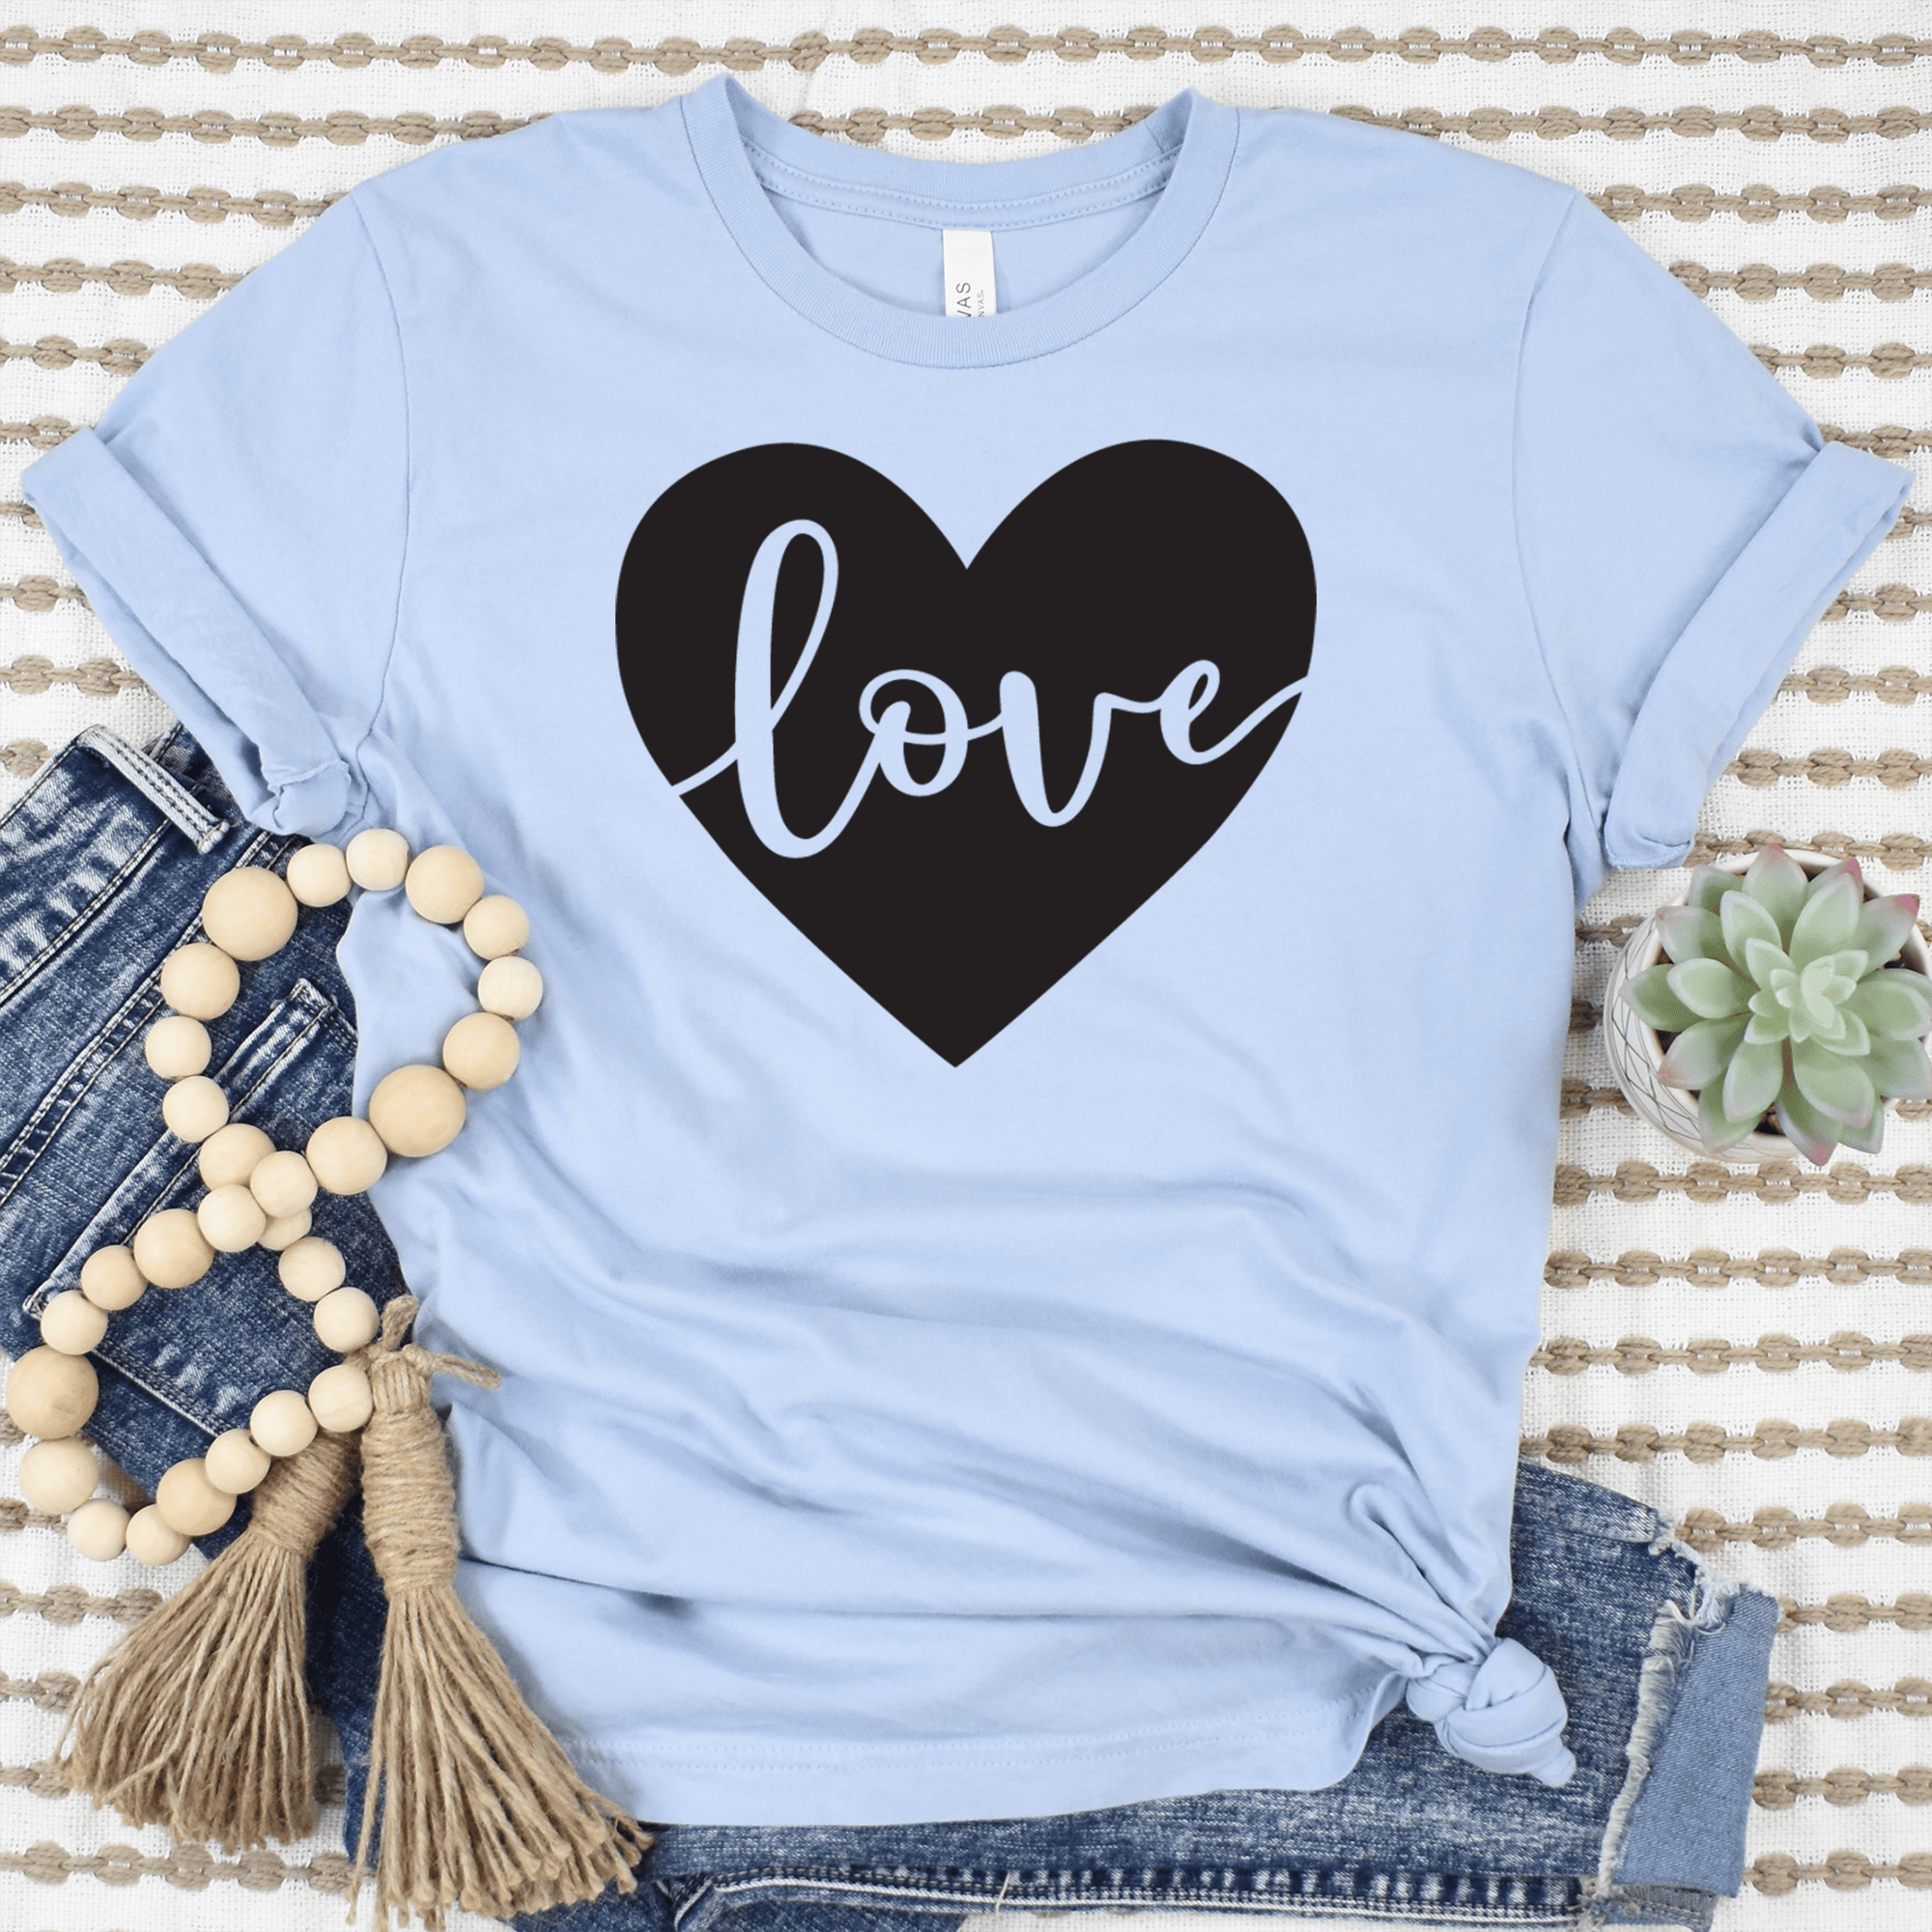 Light Blue Womens T-Shirt With Heart Carved Love Design